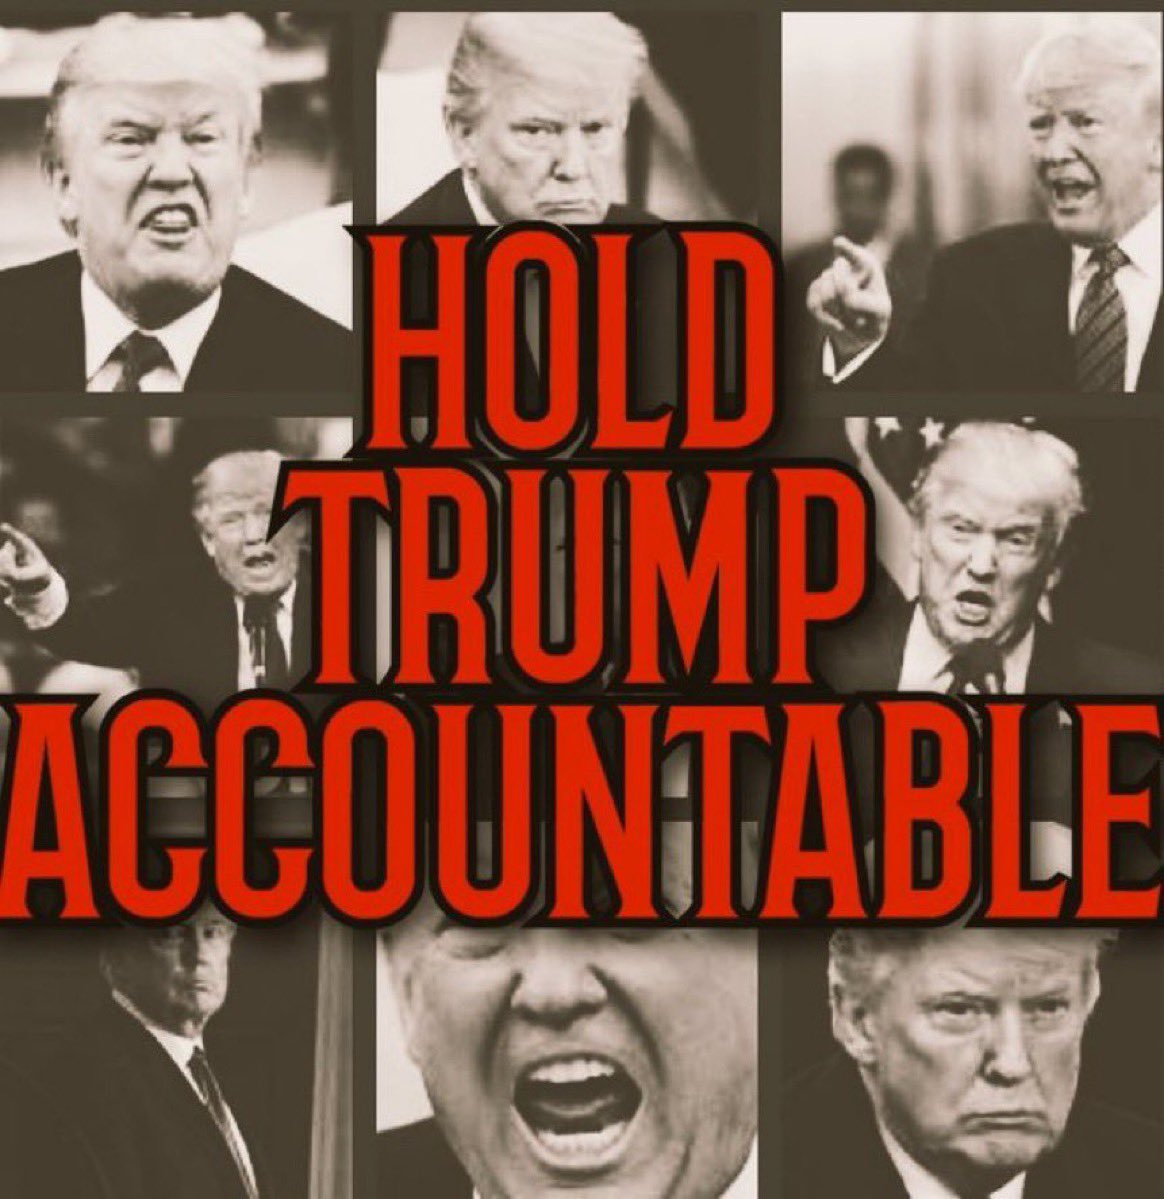 MAGAts and Trump #LockThemAllUp Trump is #DomesticTerrorist out on bail who is ignoring a gag order and threatening witnesses, prosecutors, judges and their families. Don threatened President of the United States #LockHimUpAlready Lock Trump Up Now For Life #SecretService Jail